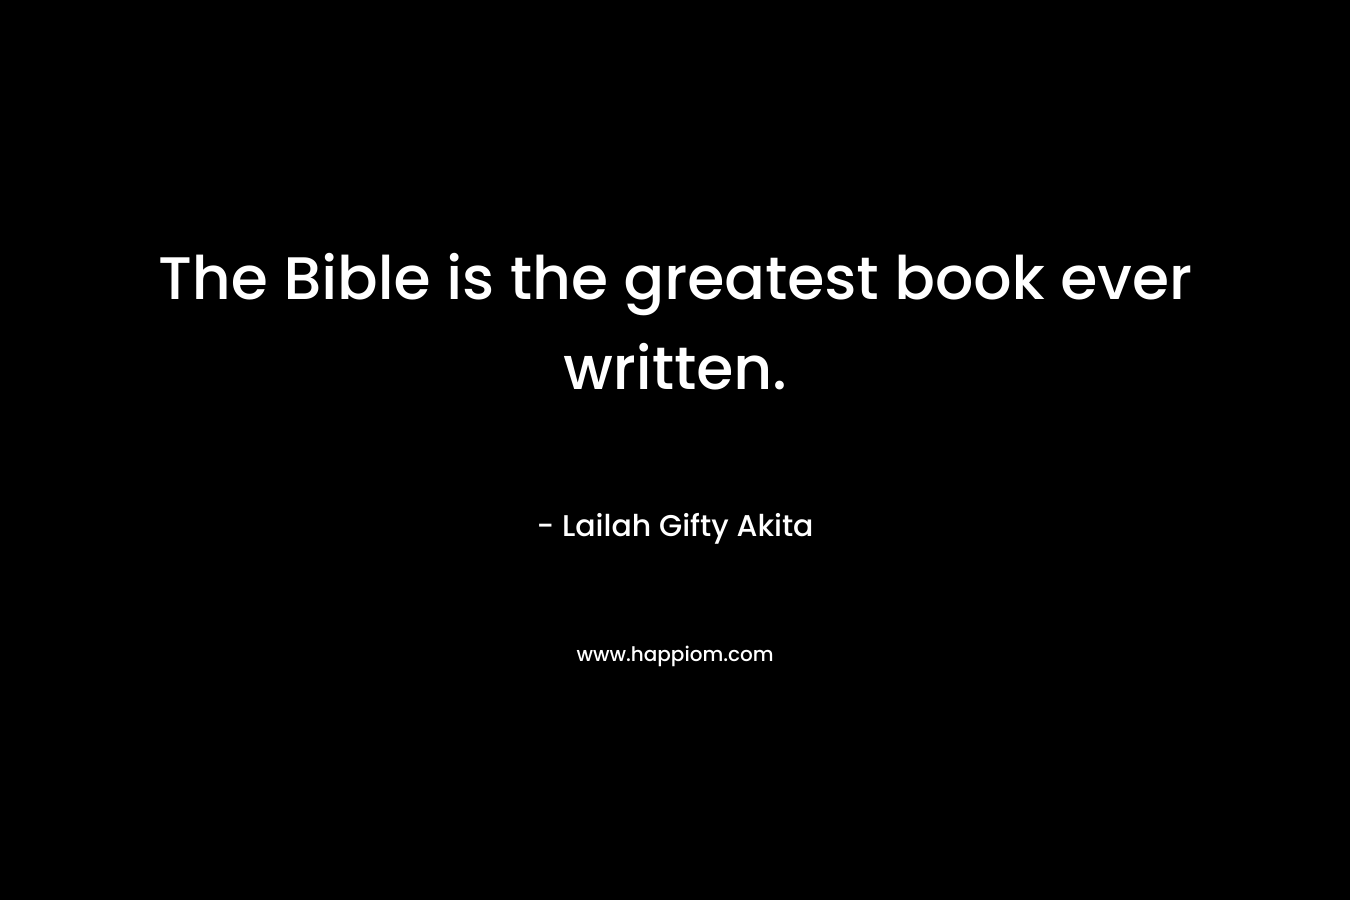 The Bible is the greatest book ever written.